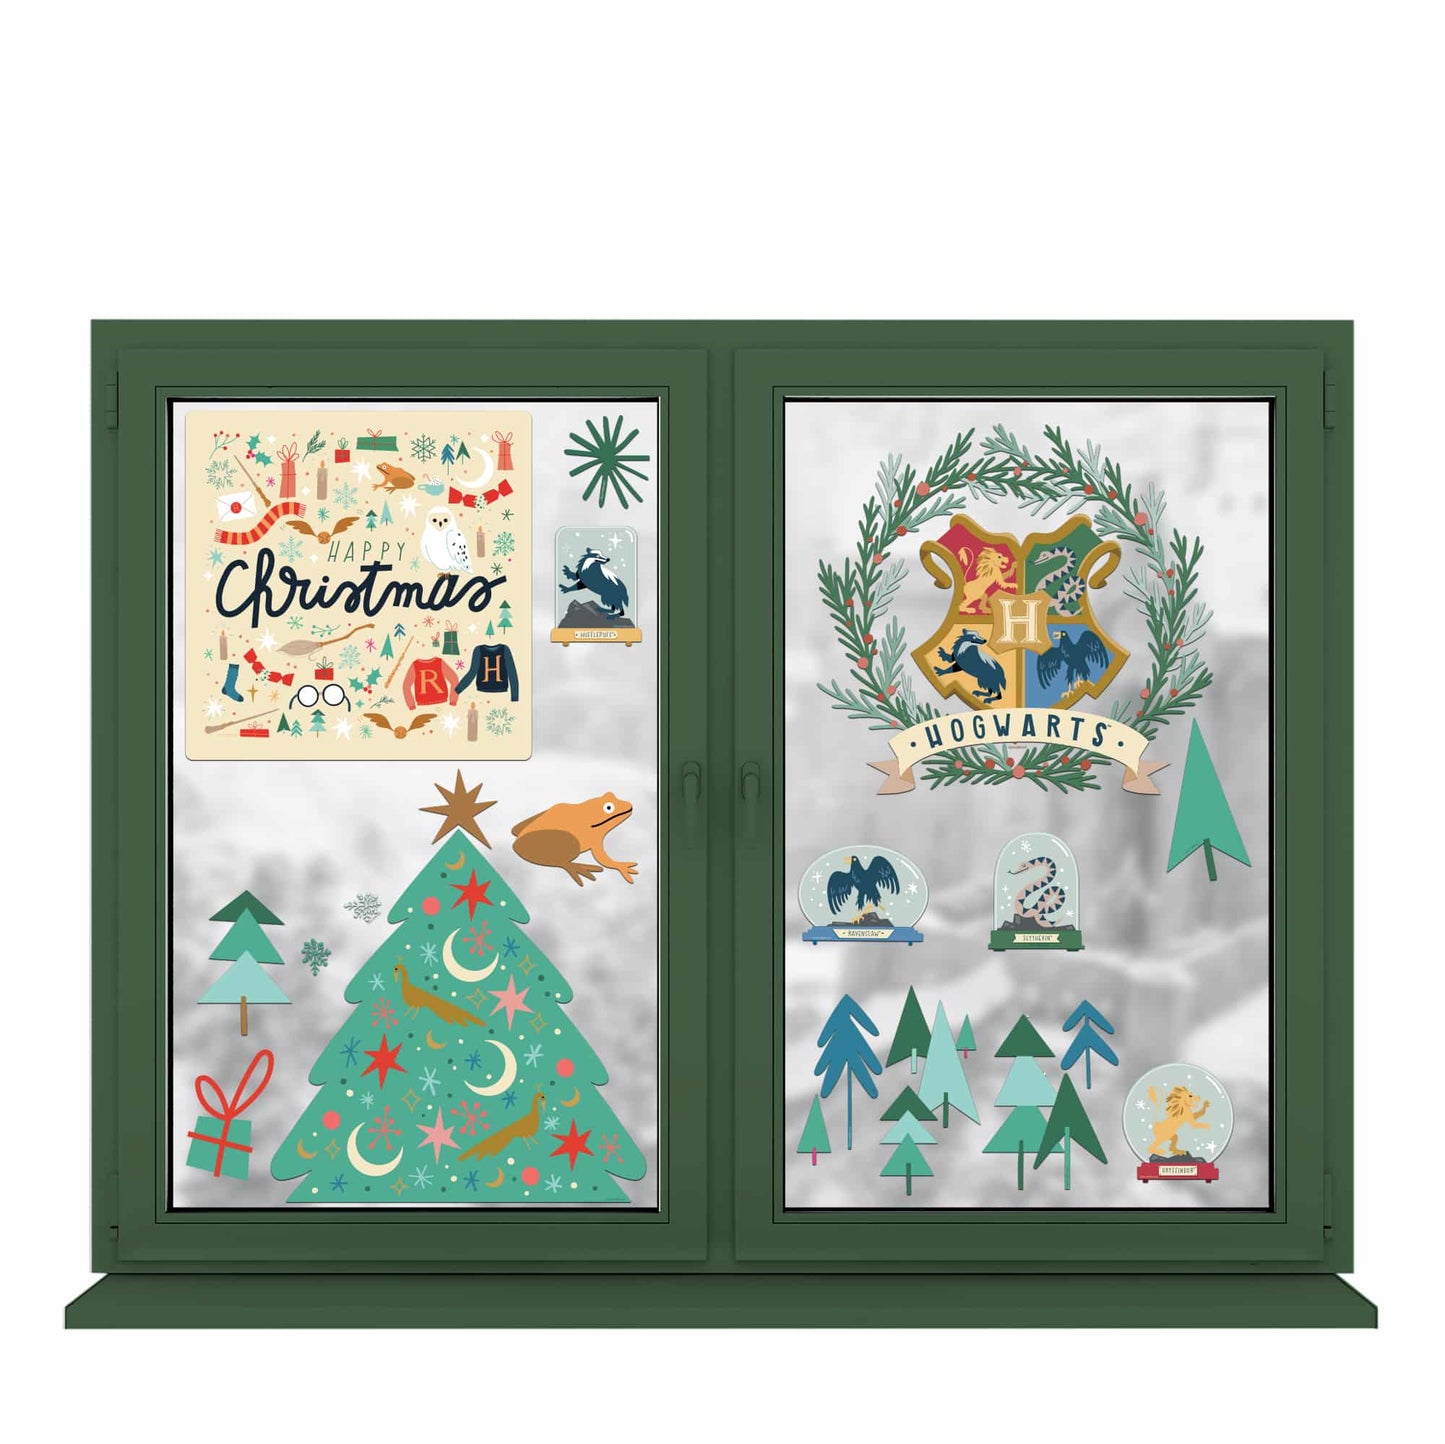 Harry Potter Holidays at Hogwarts Window Clings